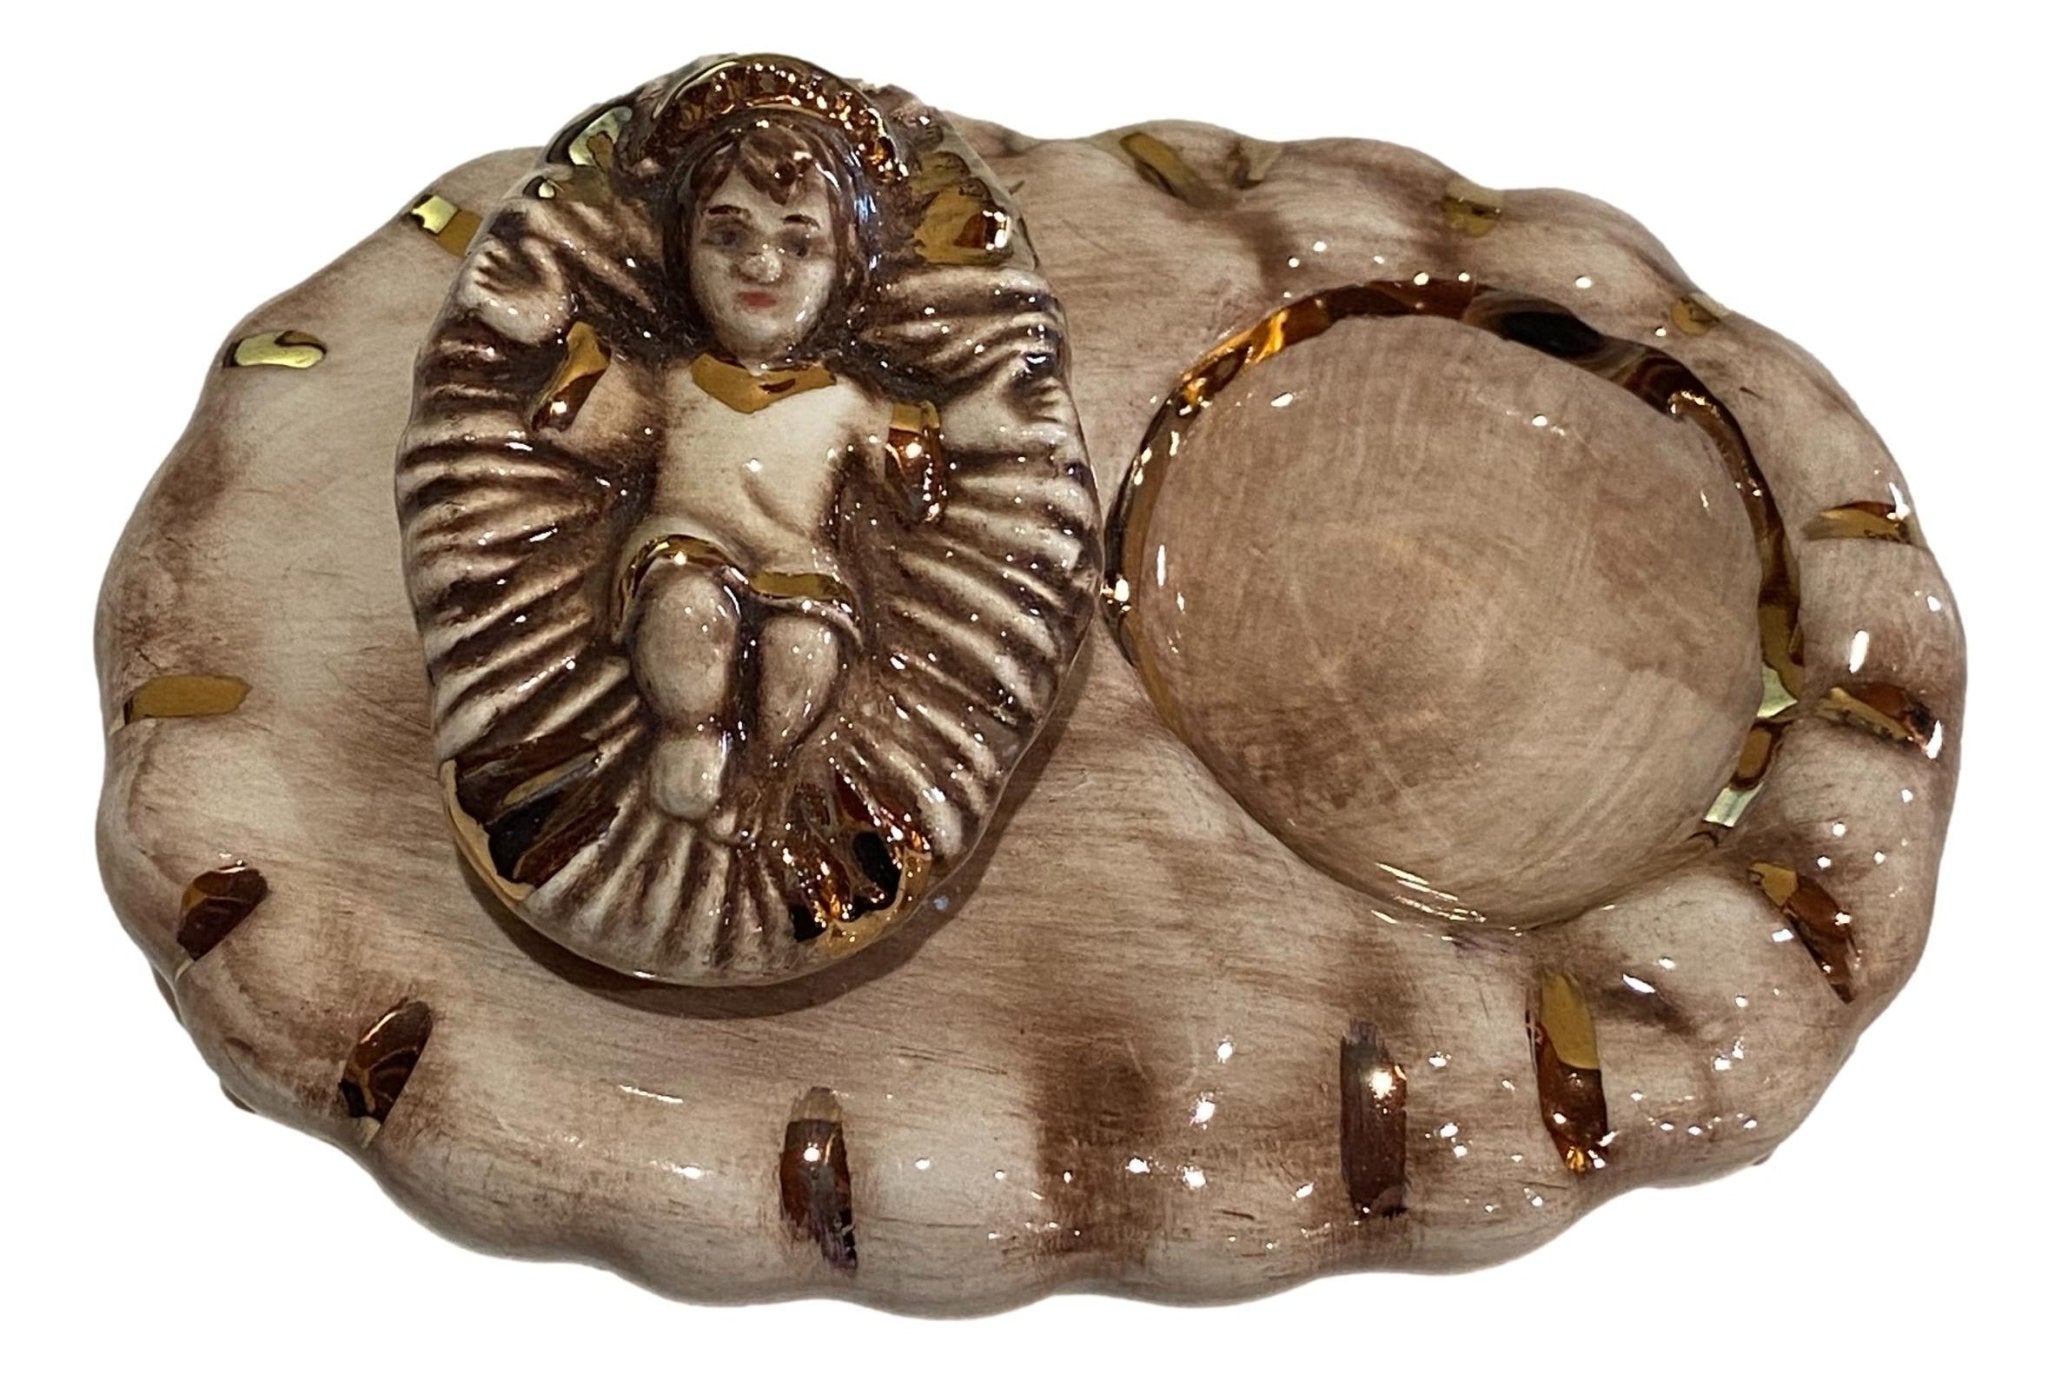 Statue Baby Jesus Candle Holder Glazed Ceramic With Gold Detailing 5.5"L X 3.5"W X 2" H Handcrafted By Local El Paso Artist - Ysleta Mission Gift Shop- VOTED 2022 El Paso's Best Gift Shop